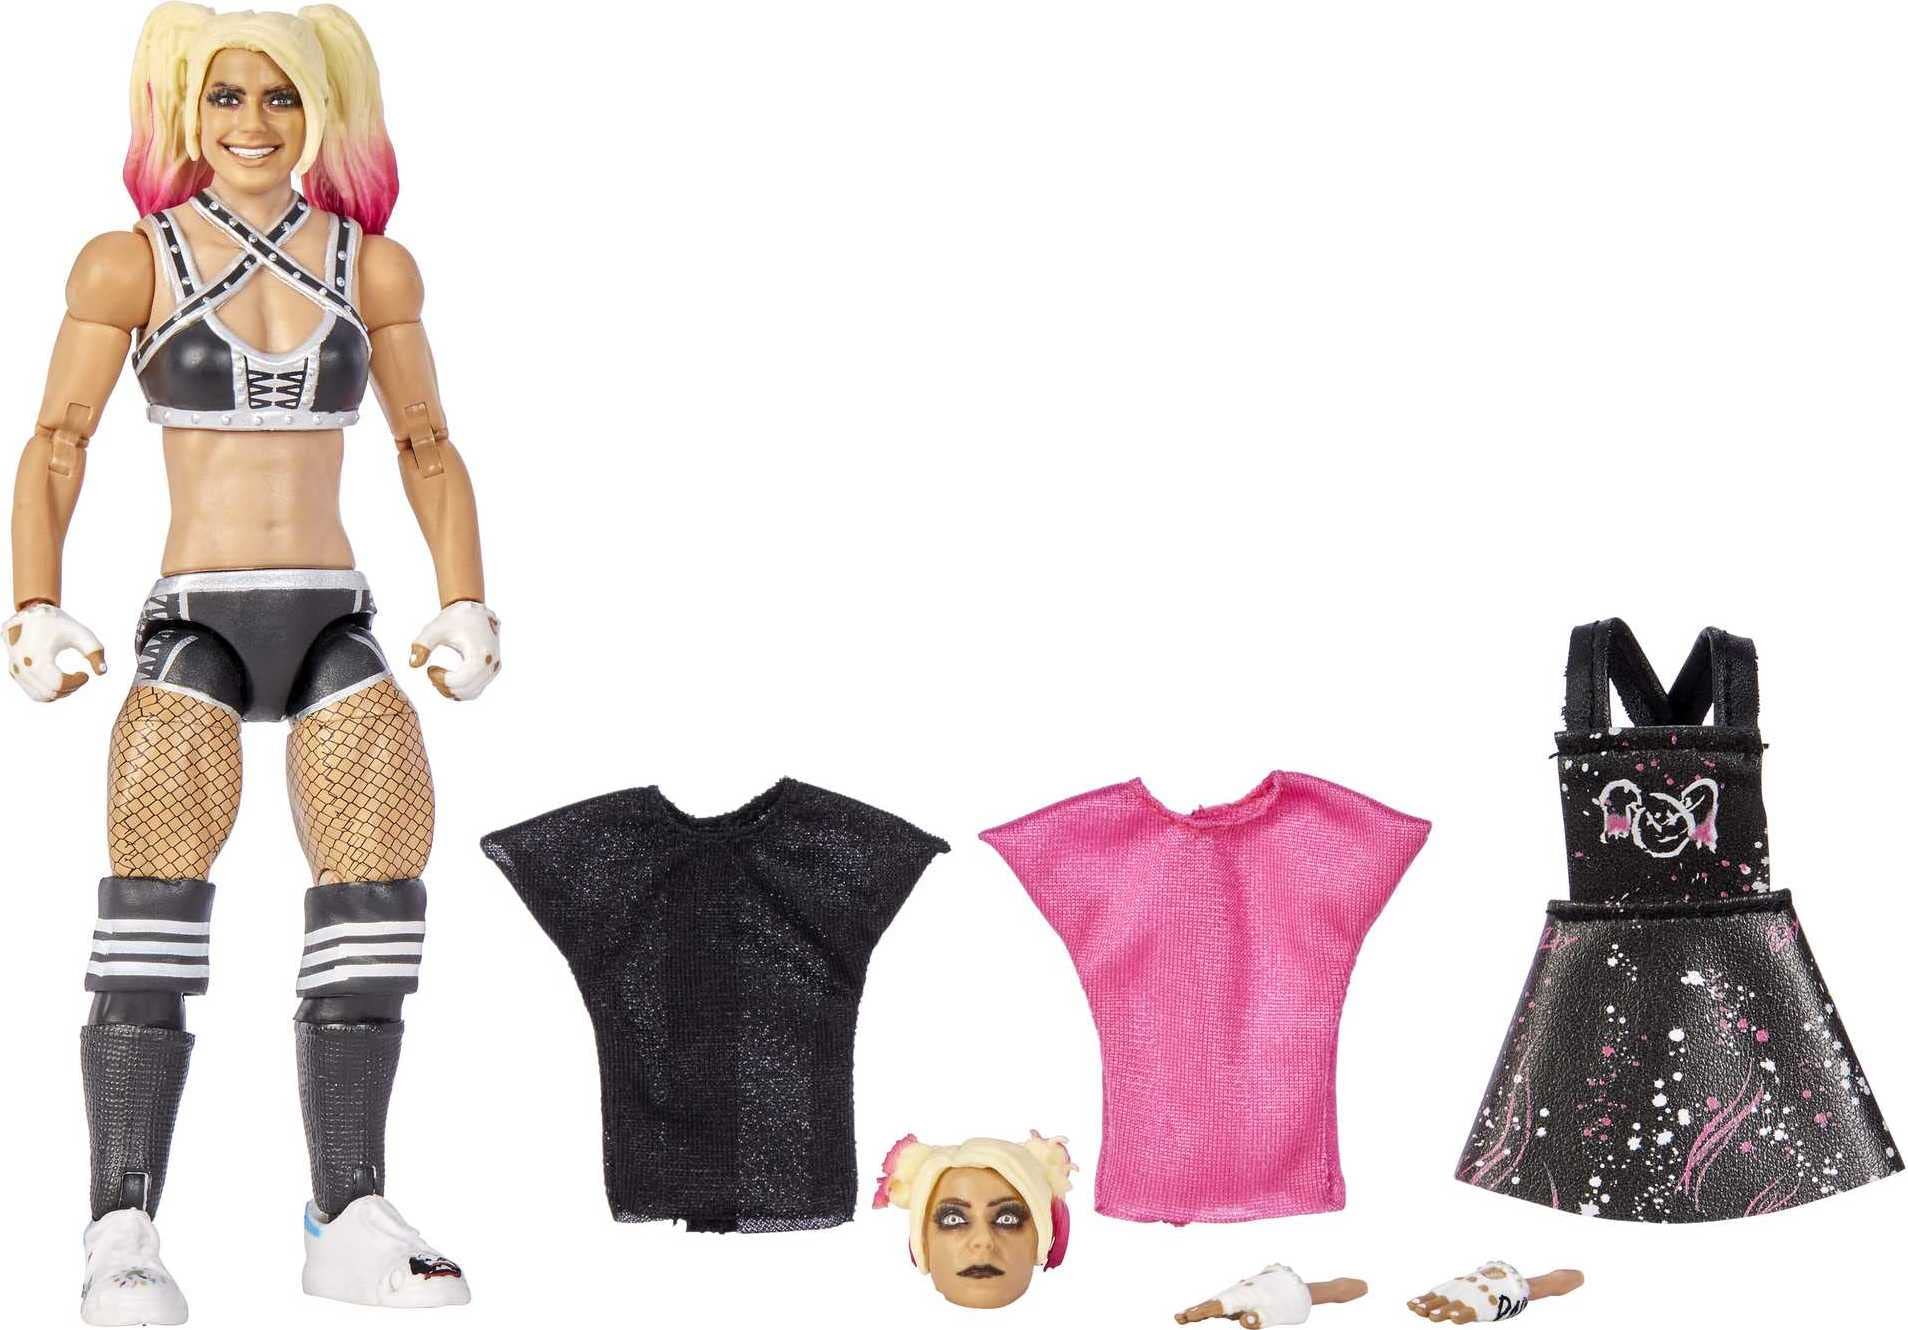 Mattel Ultimate Edition Alexa Bliss Action Figure, 6-inch Collectible with Interchangeable Heads, Swappable Hands & Entrance Gear for Ages 8 Years Old & Up